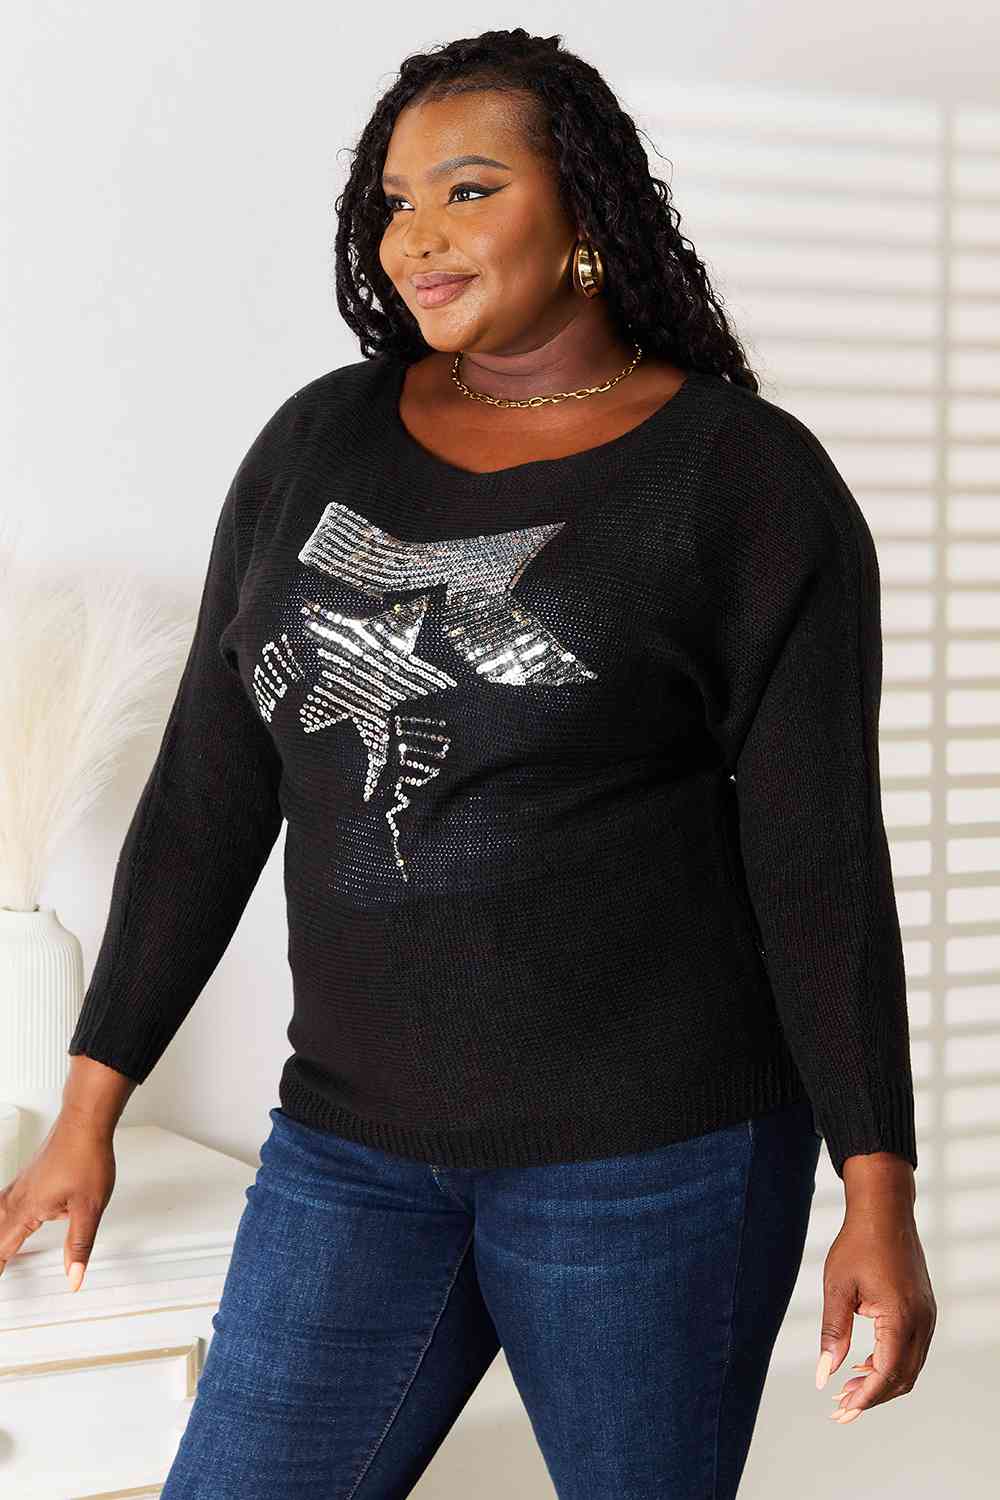 a woman wearing a black sweater and jeans